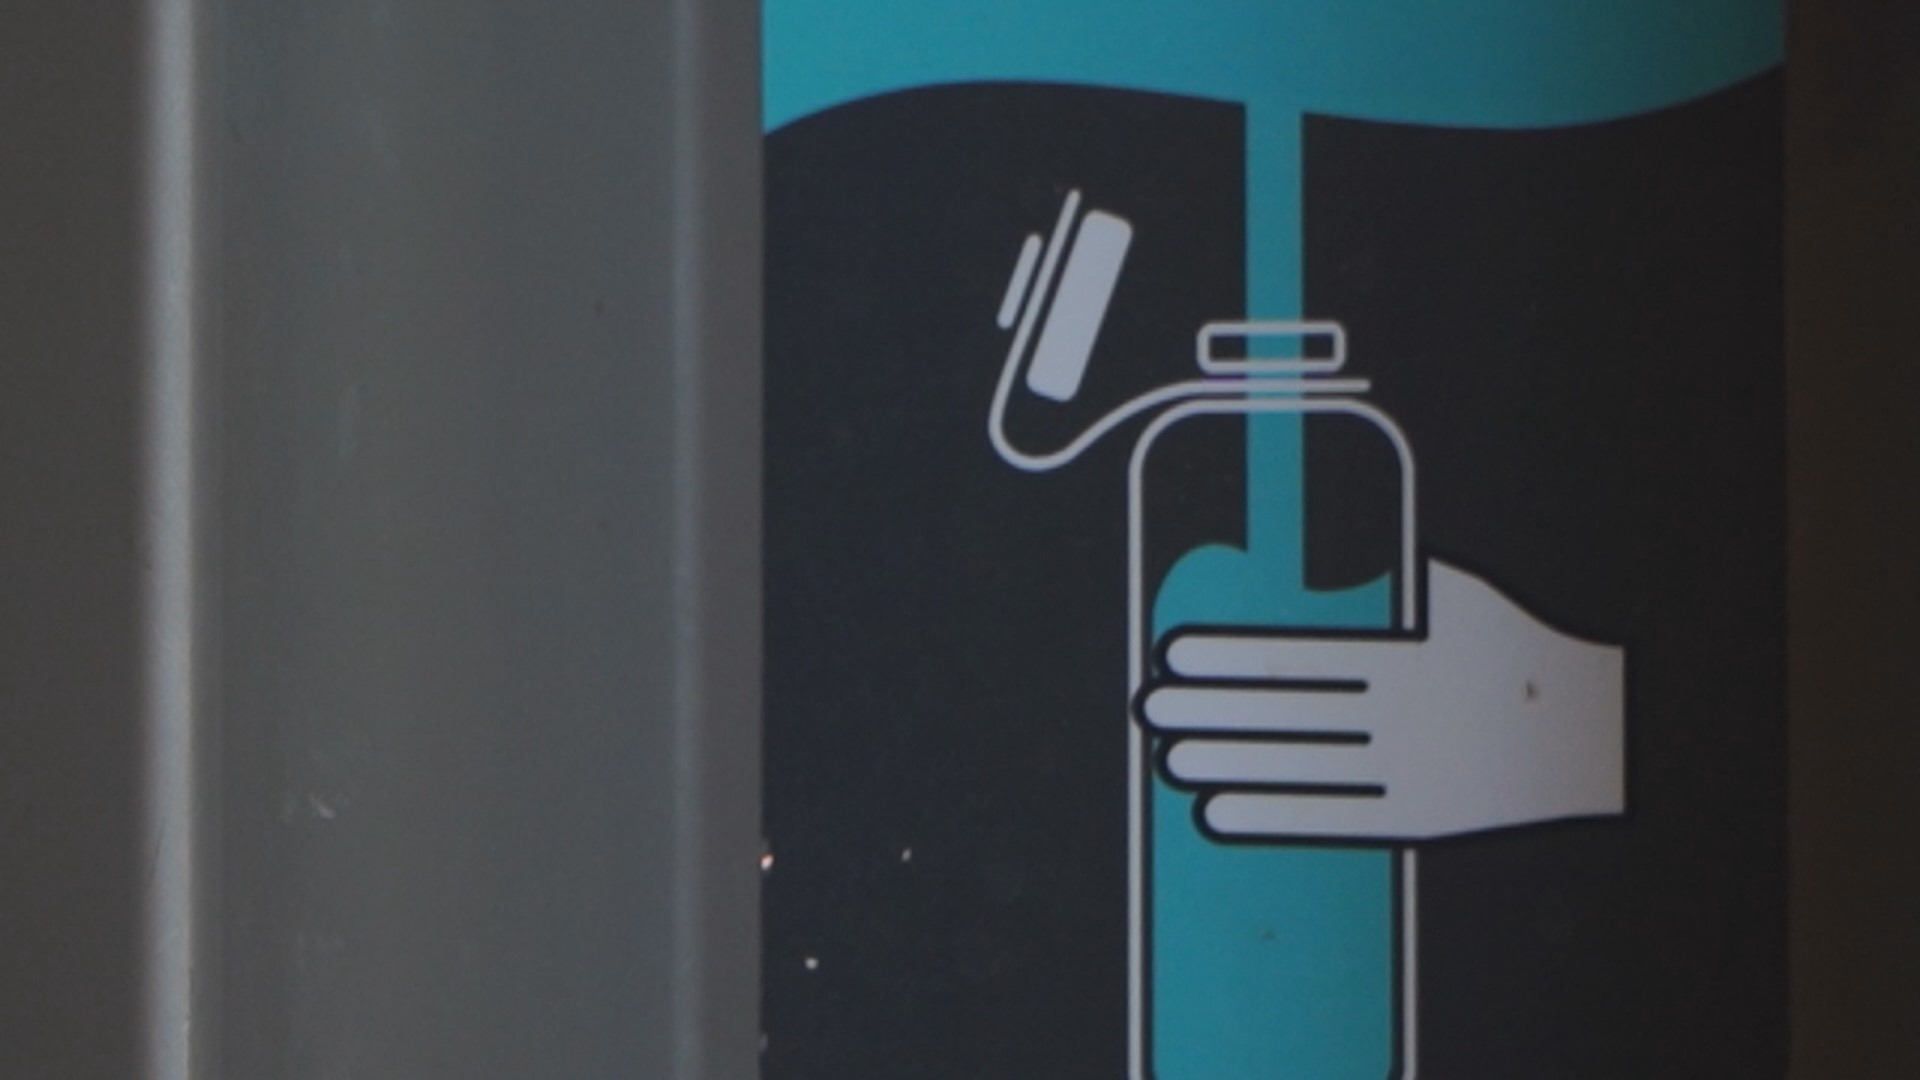 The water fountains at 15 Moline parks are getting an upgrade to include water bottle refilling stations as part of the city's effort to reduce plastic waste.